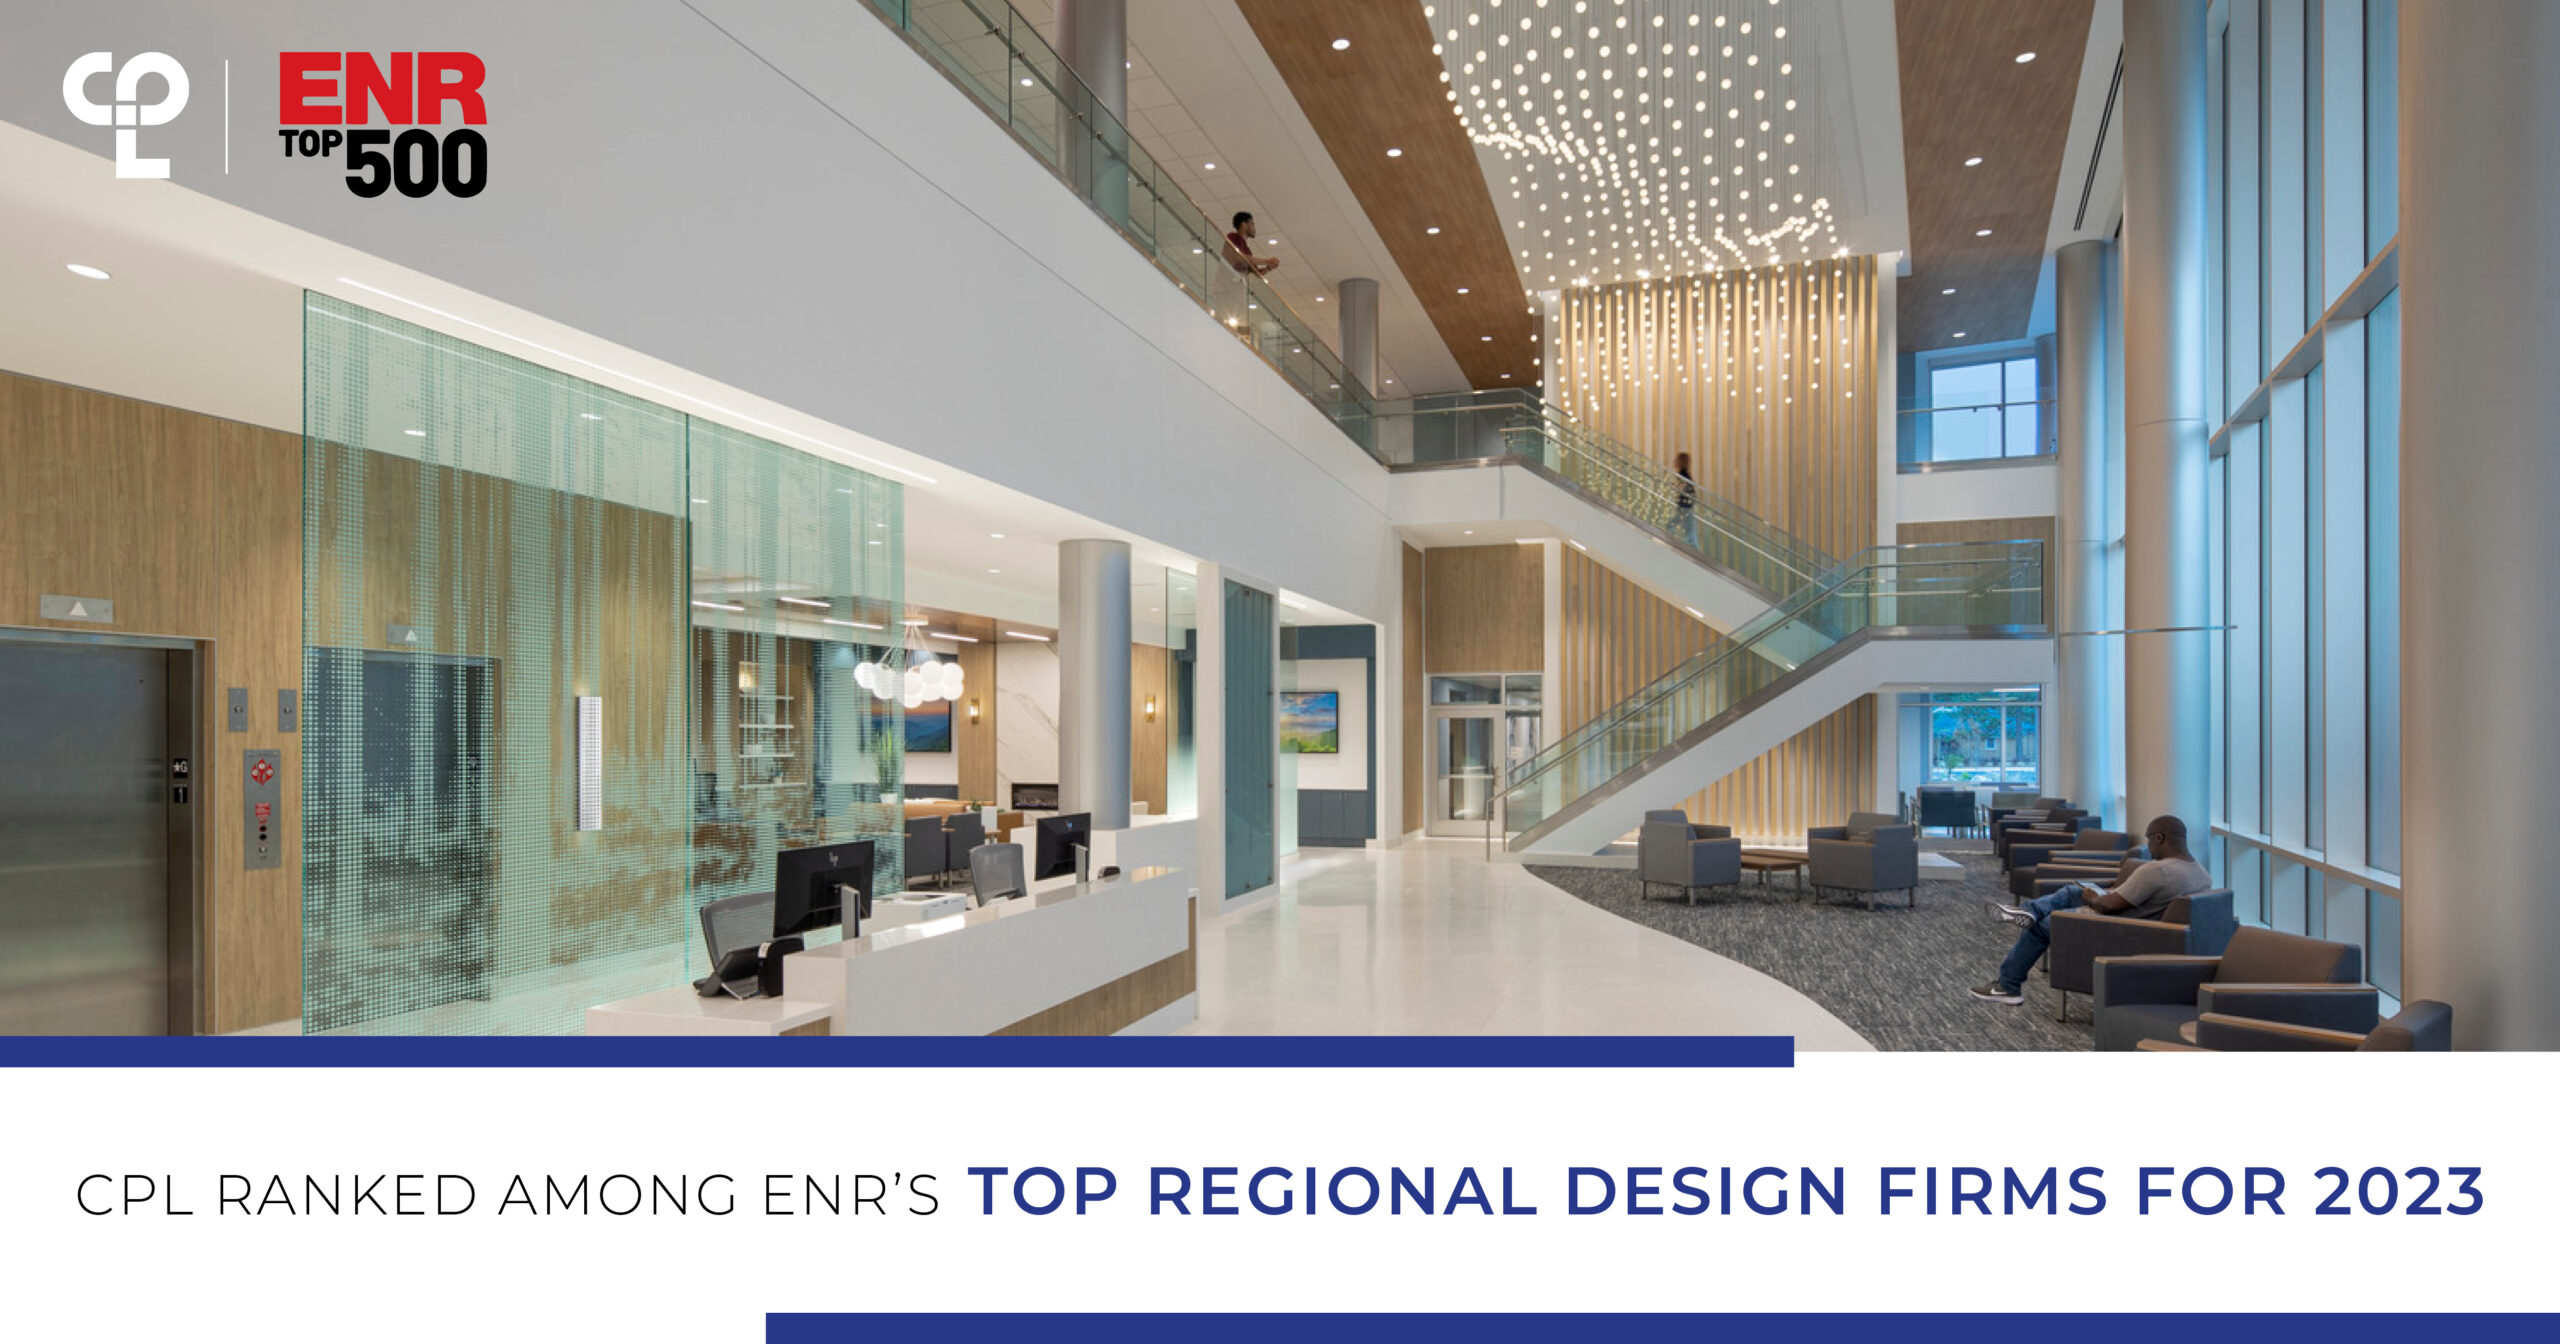 Image shows a hospital lobby design that's spacious and has glass and lighting features. The CPL logo and the ENR (Engineering New Record) Top 500 Logo appear together in the top left corner. At the bottom it reads "CPL ranked among ENR's top regional design firms for 2023"